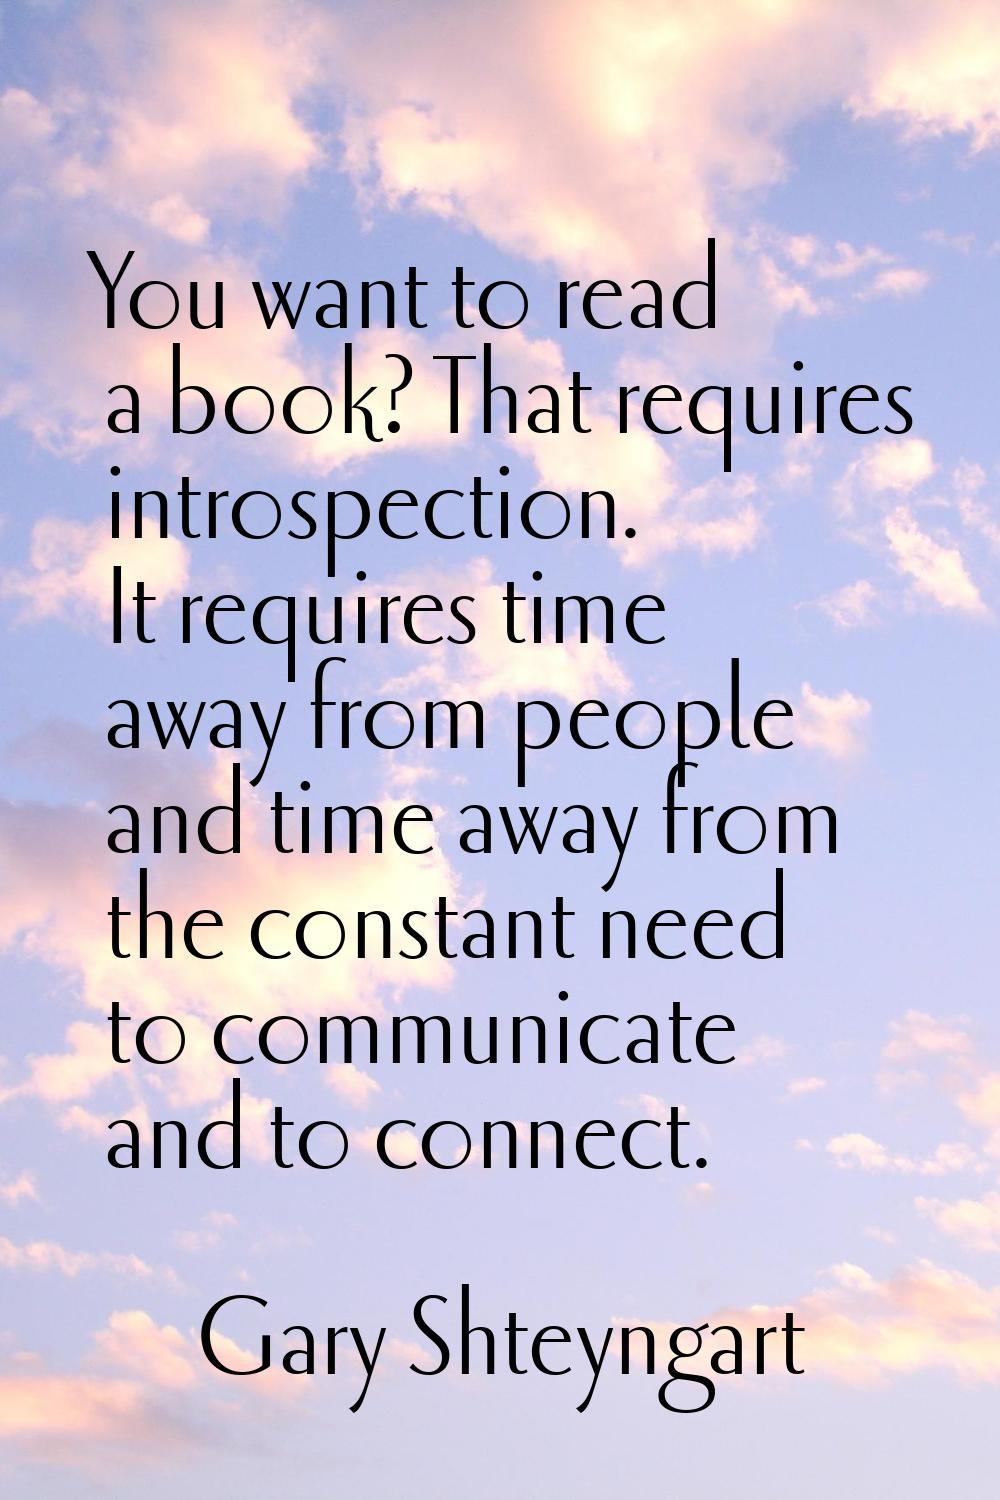 You want to read a book? That requires introspection. It requires time away from people and time aw